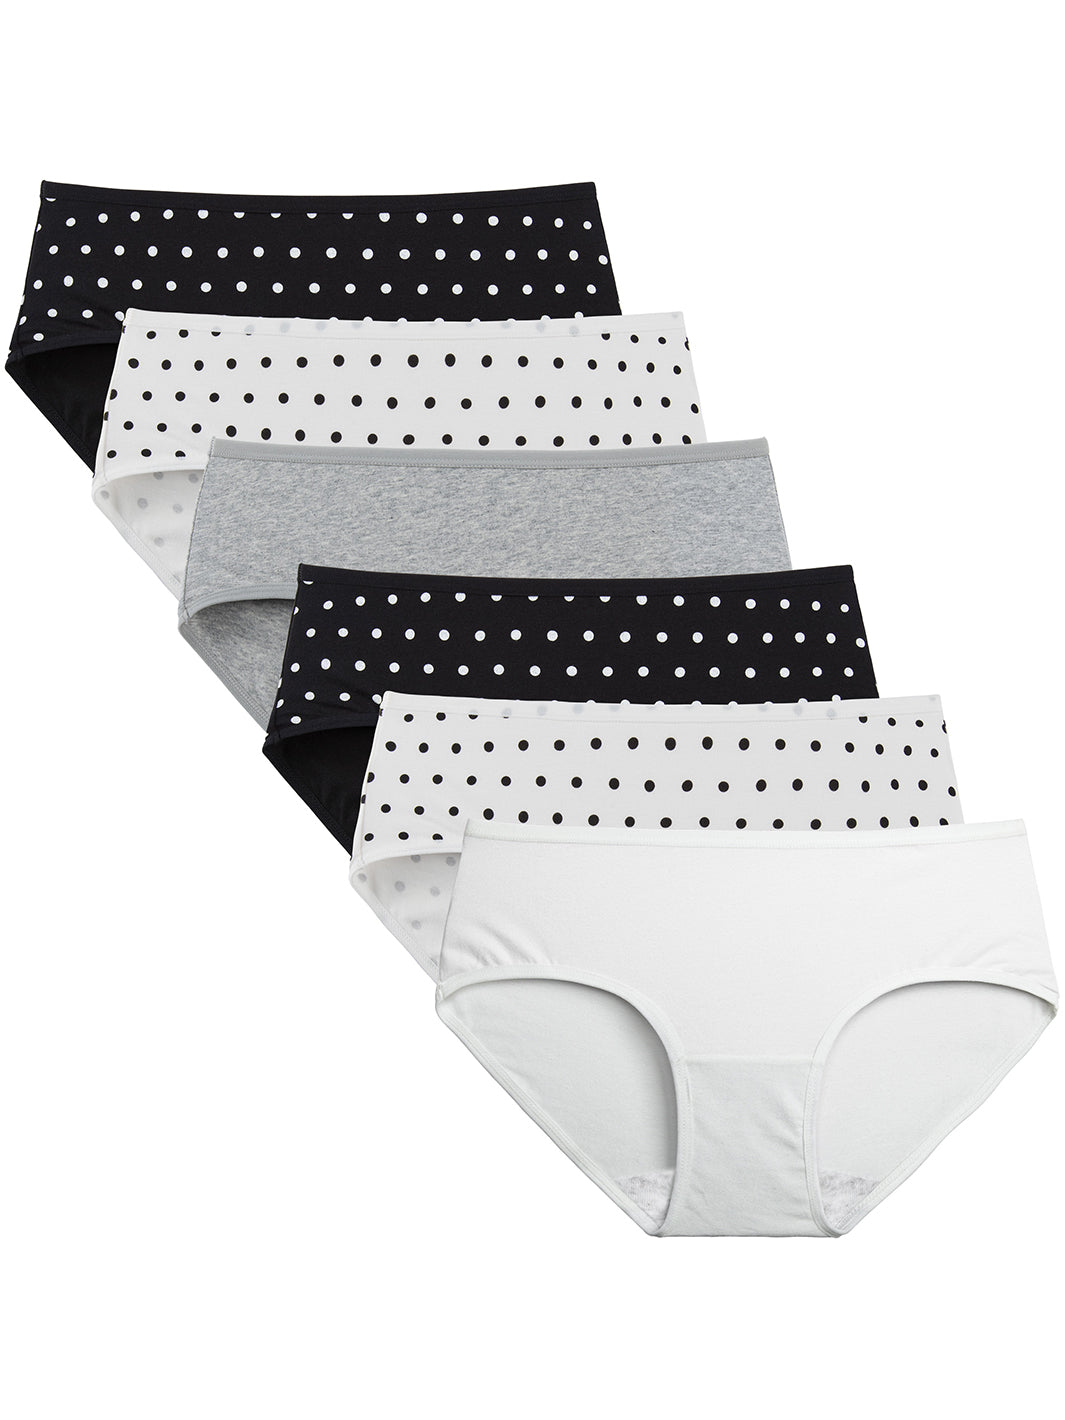 Buy FlyBaby Women Hipster Underwear, FC6 Cotton Knicker, Hipster Panties